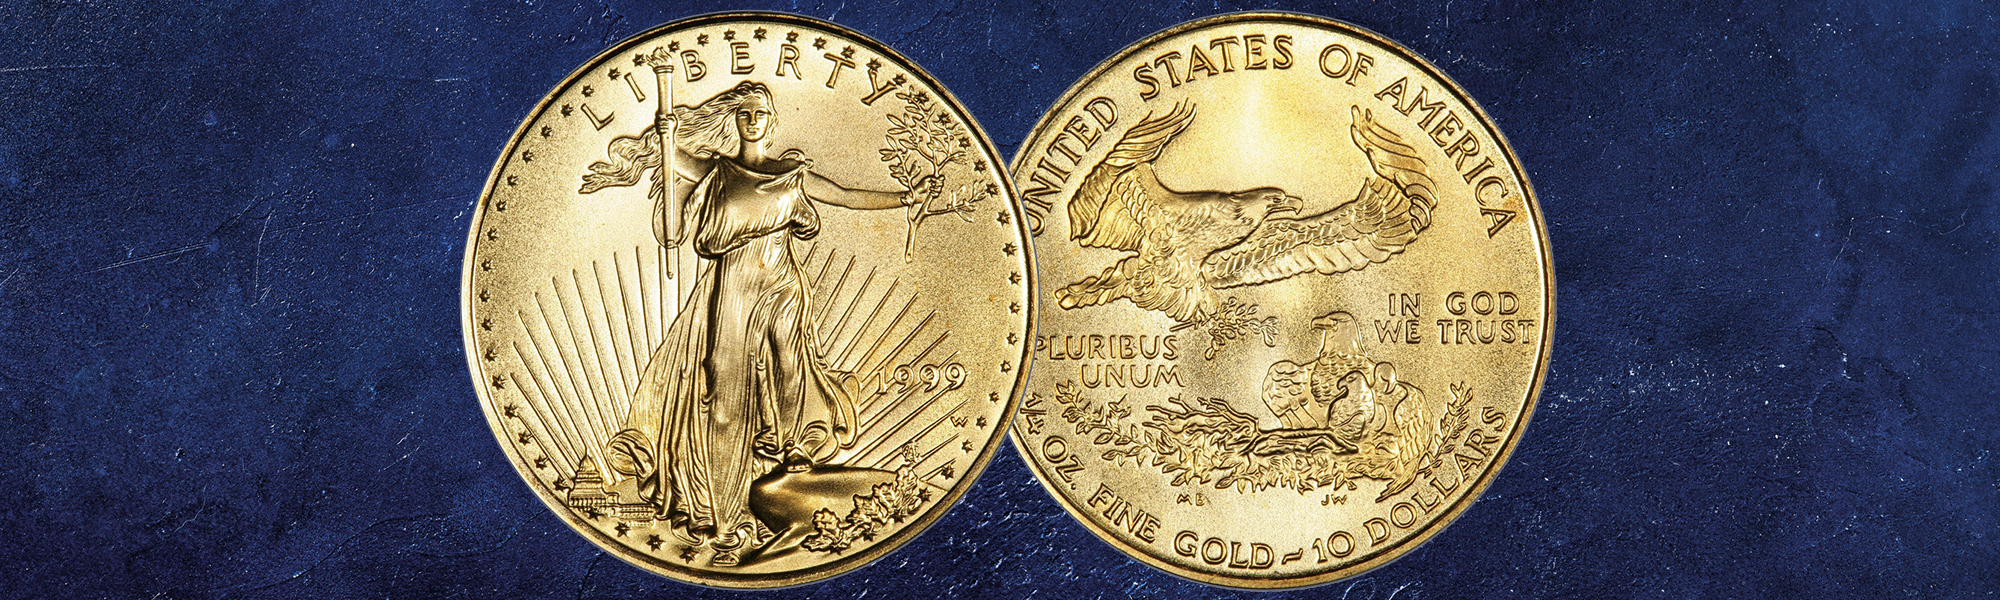 Our Guide to Rare Modern Coins